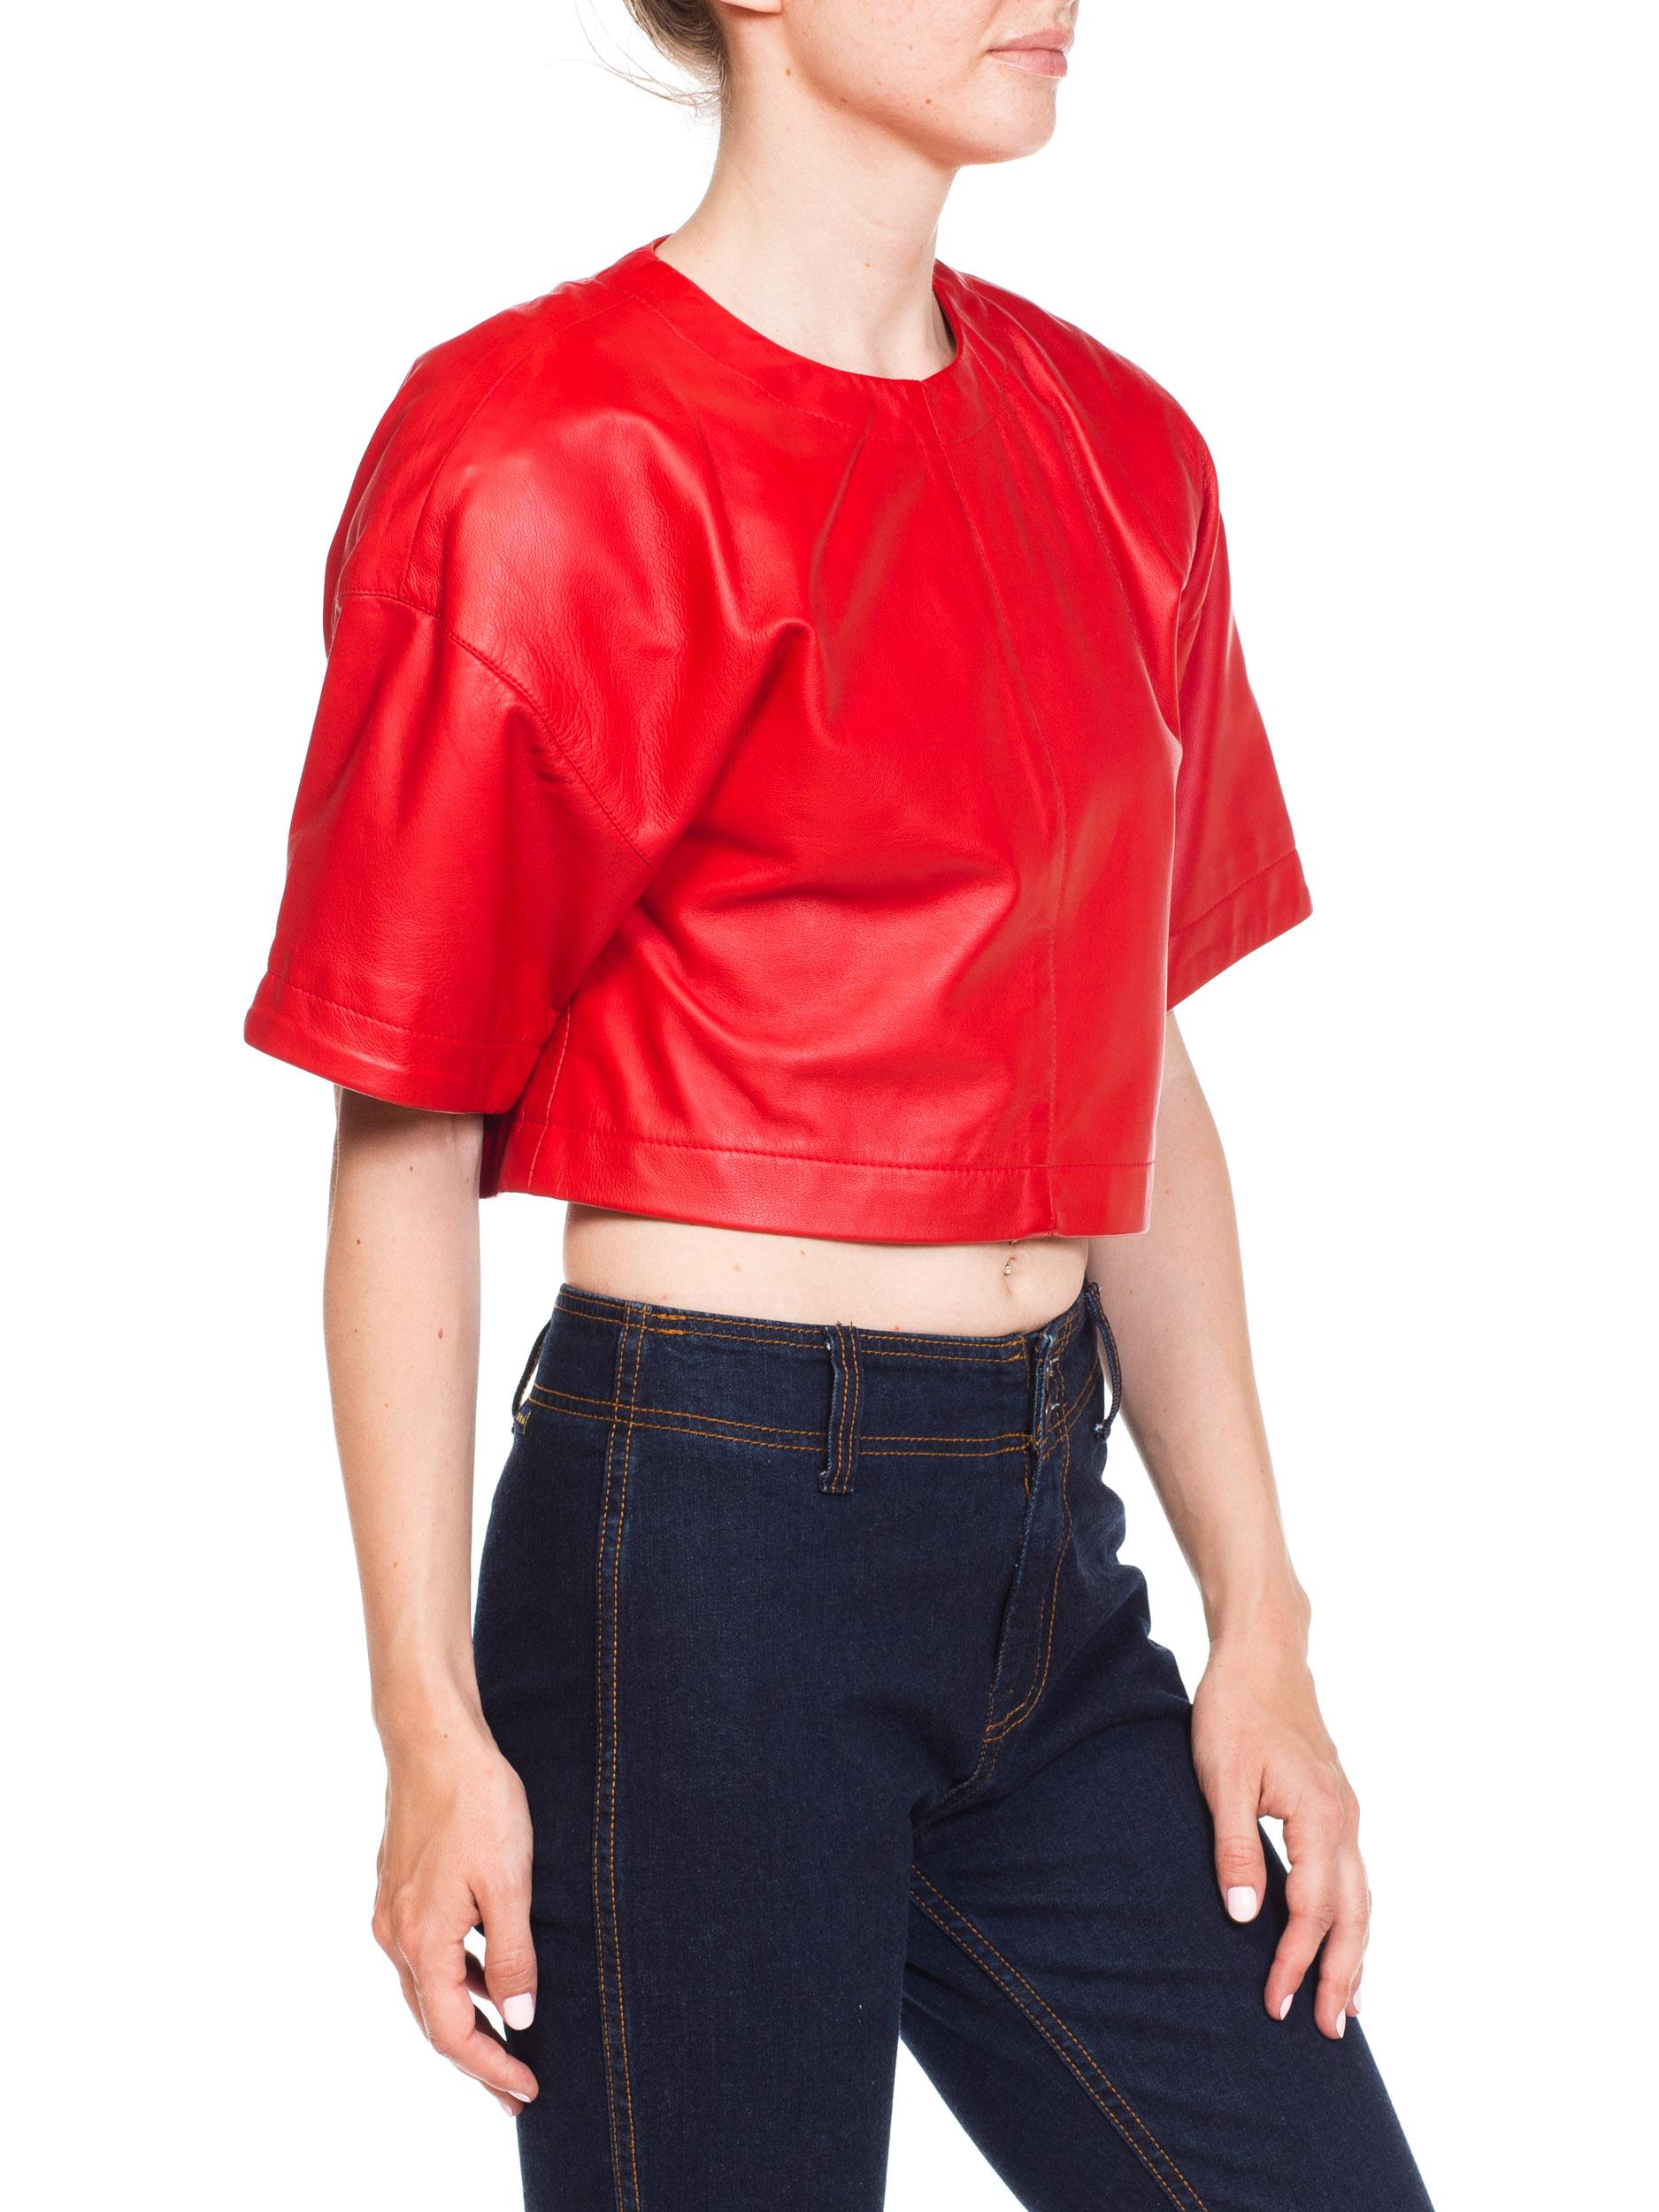 Women's 1980s Red Leather Oversized Crop Top